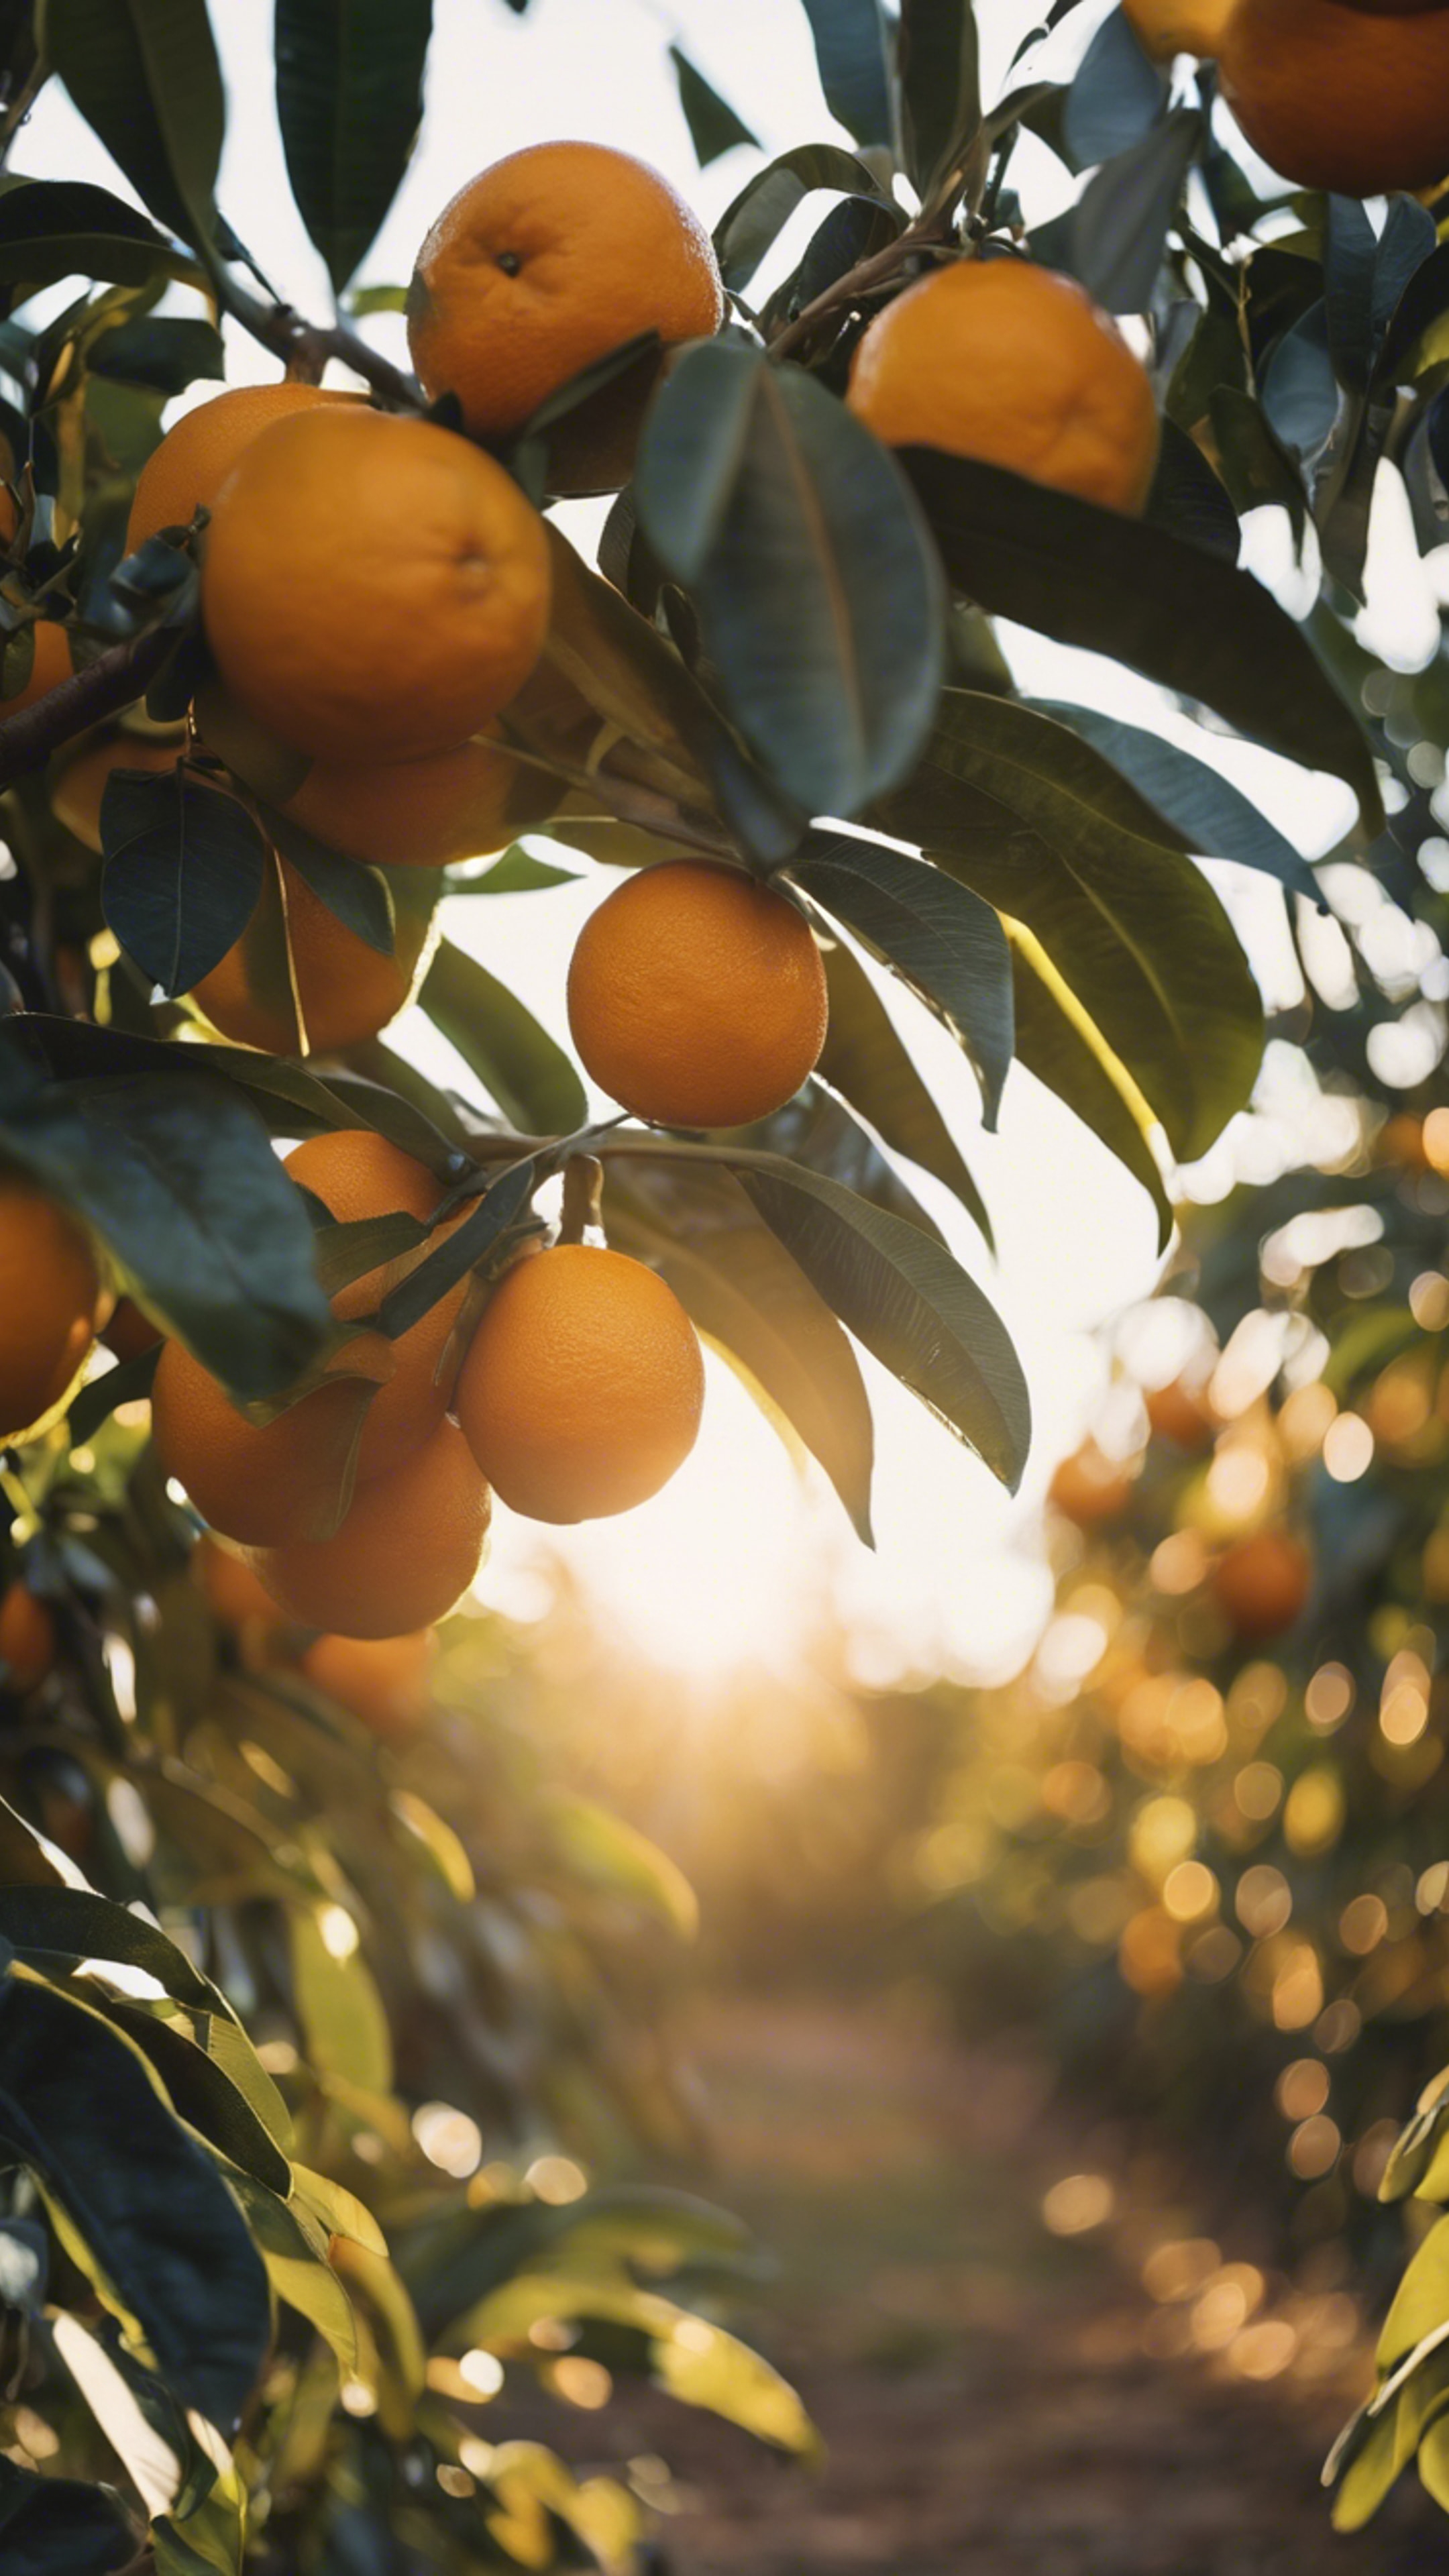 An orange grove in central Florida, with the sun casting a golden hue over ripe oranges ready for harvest. Ფონი[4bbebc31cb8441e2b681]